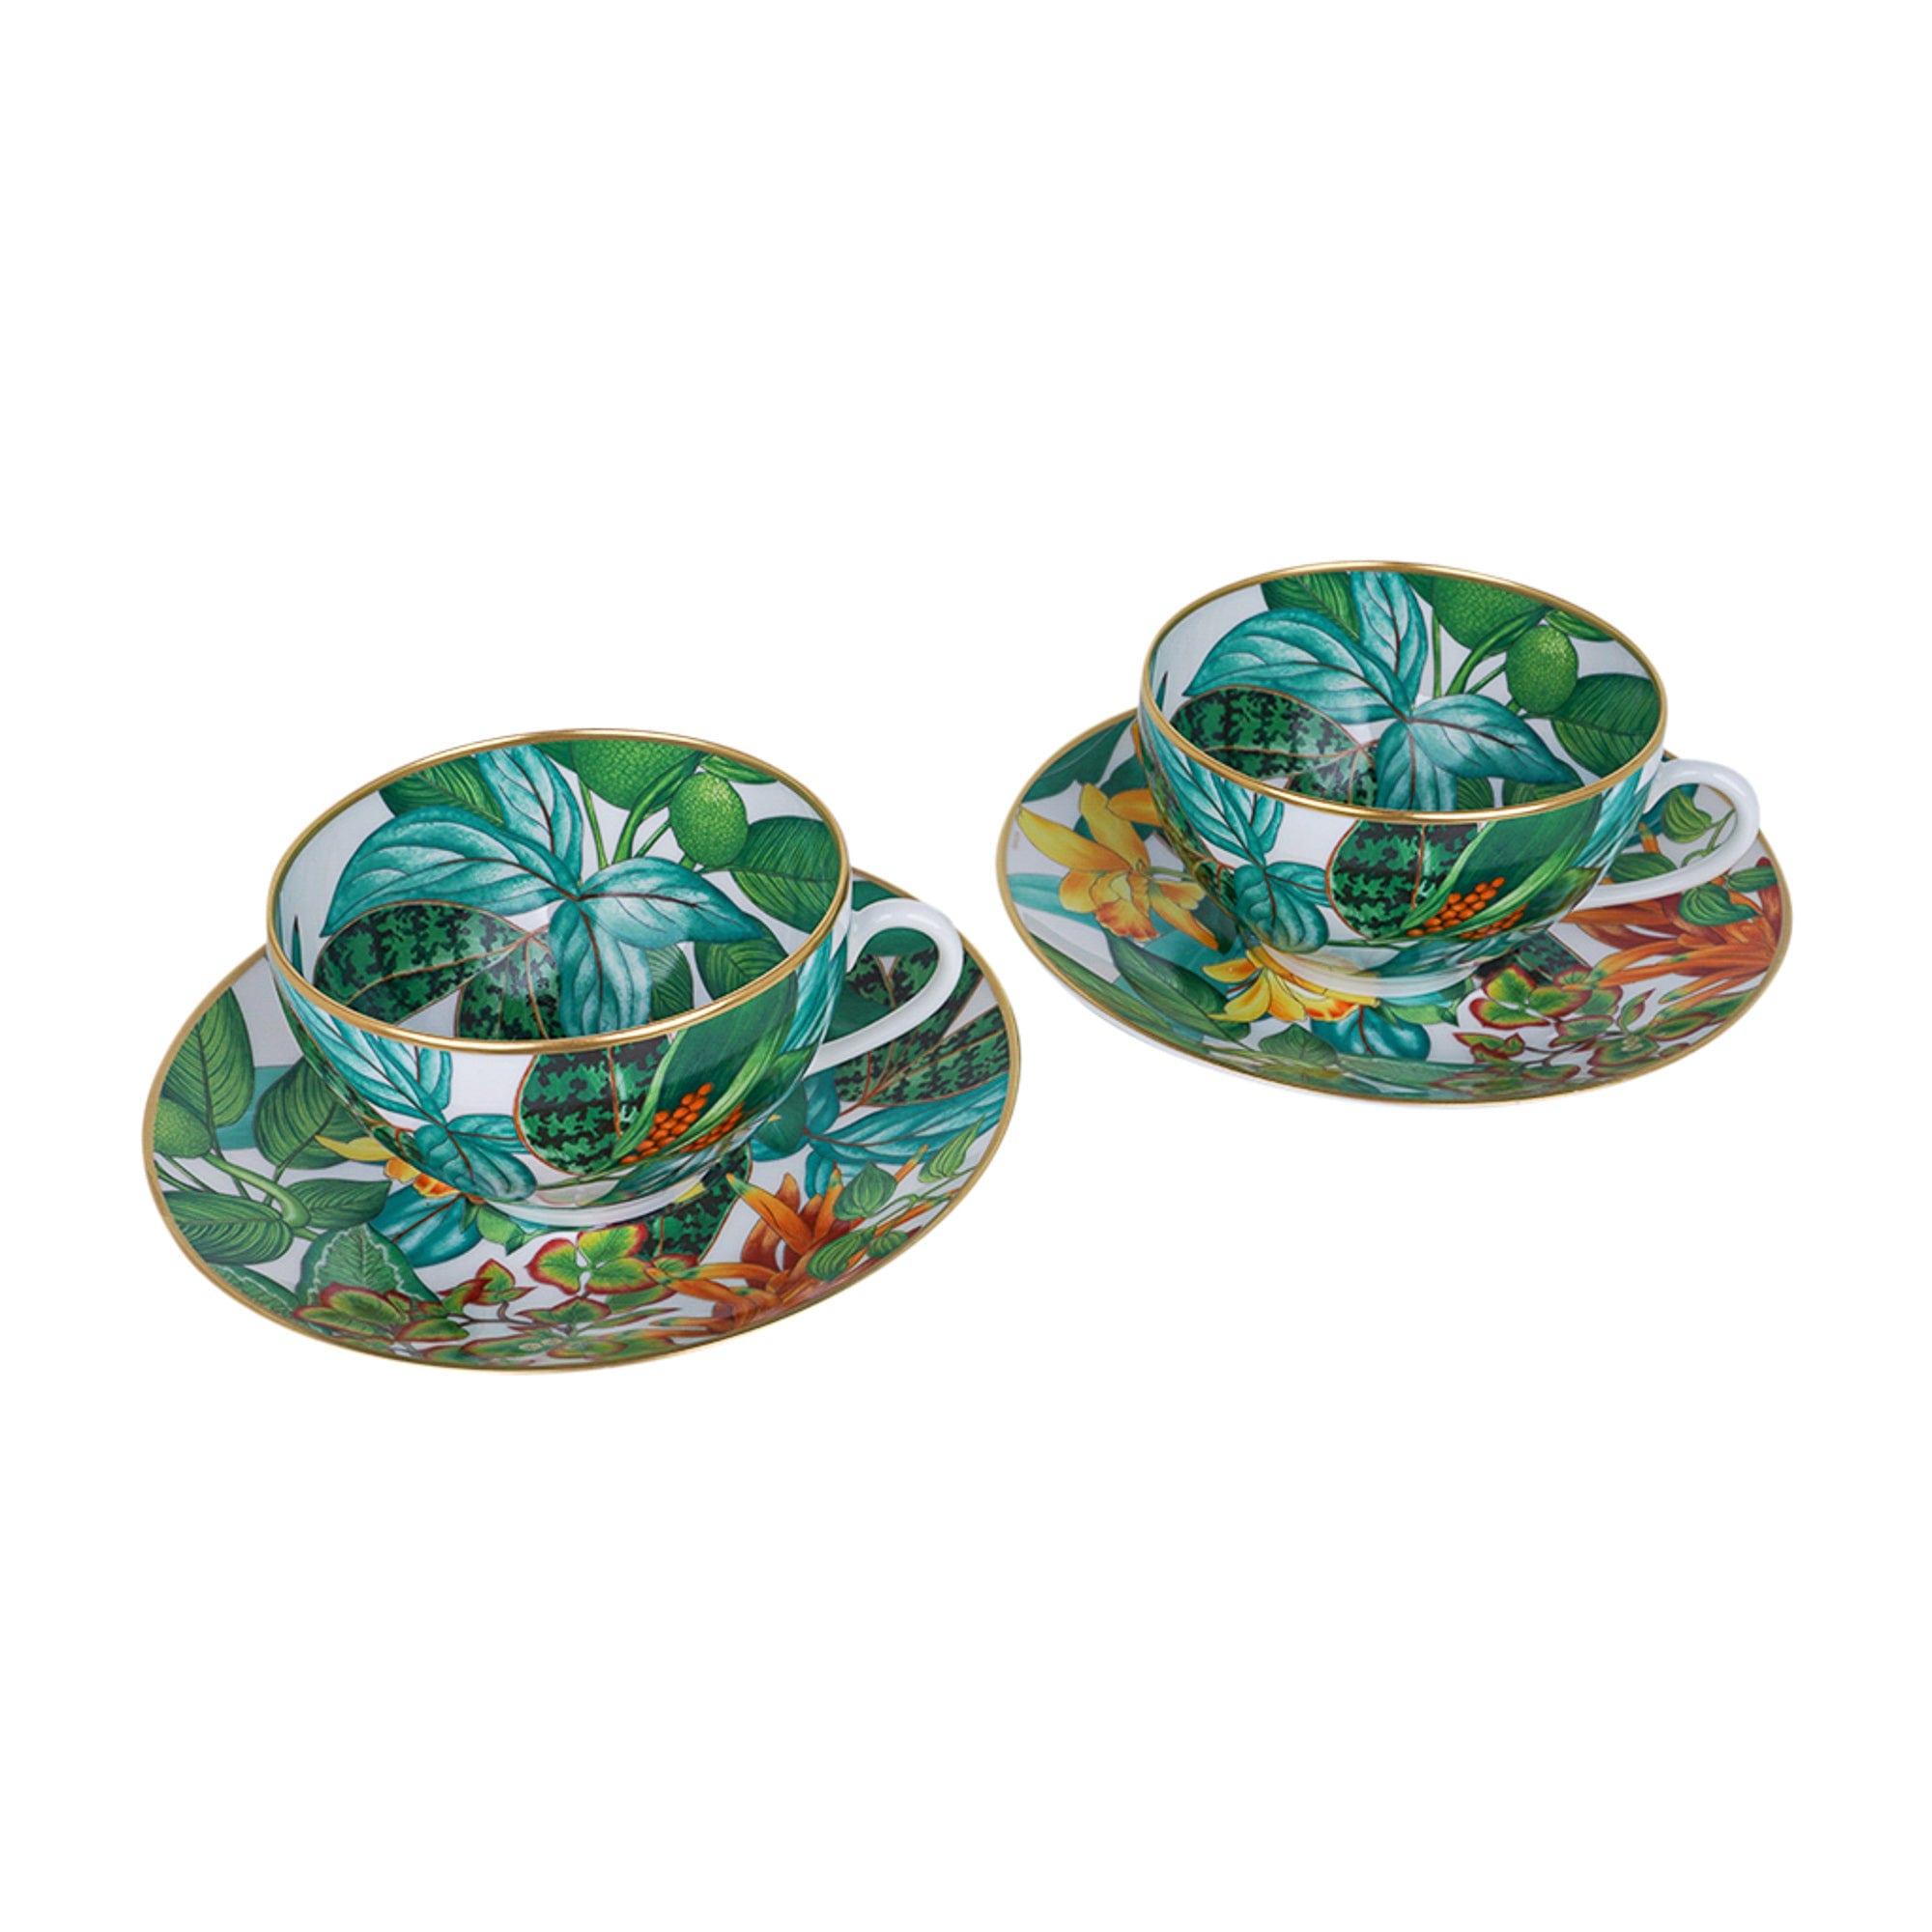 Hermes Passifolia Tea Cup Saucer Tableware 2 set Green Botanical Floral New  Auth